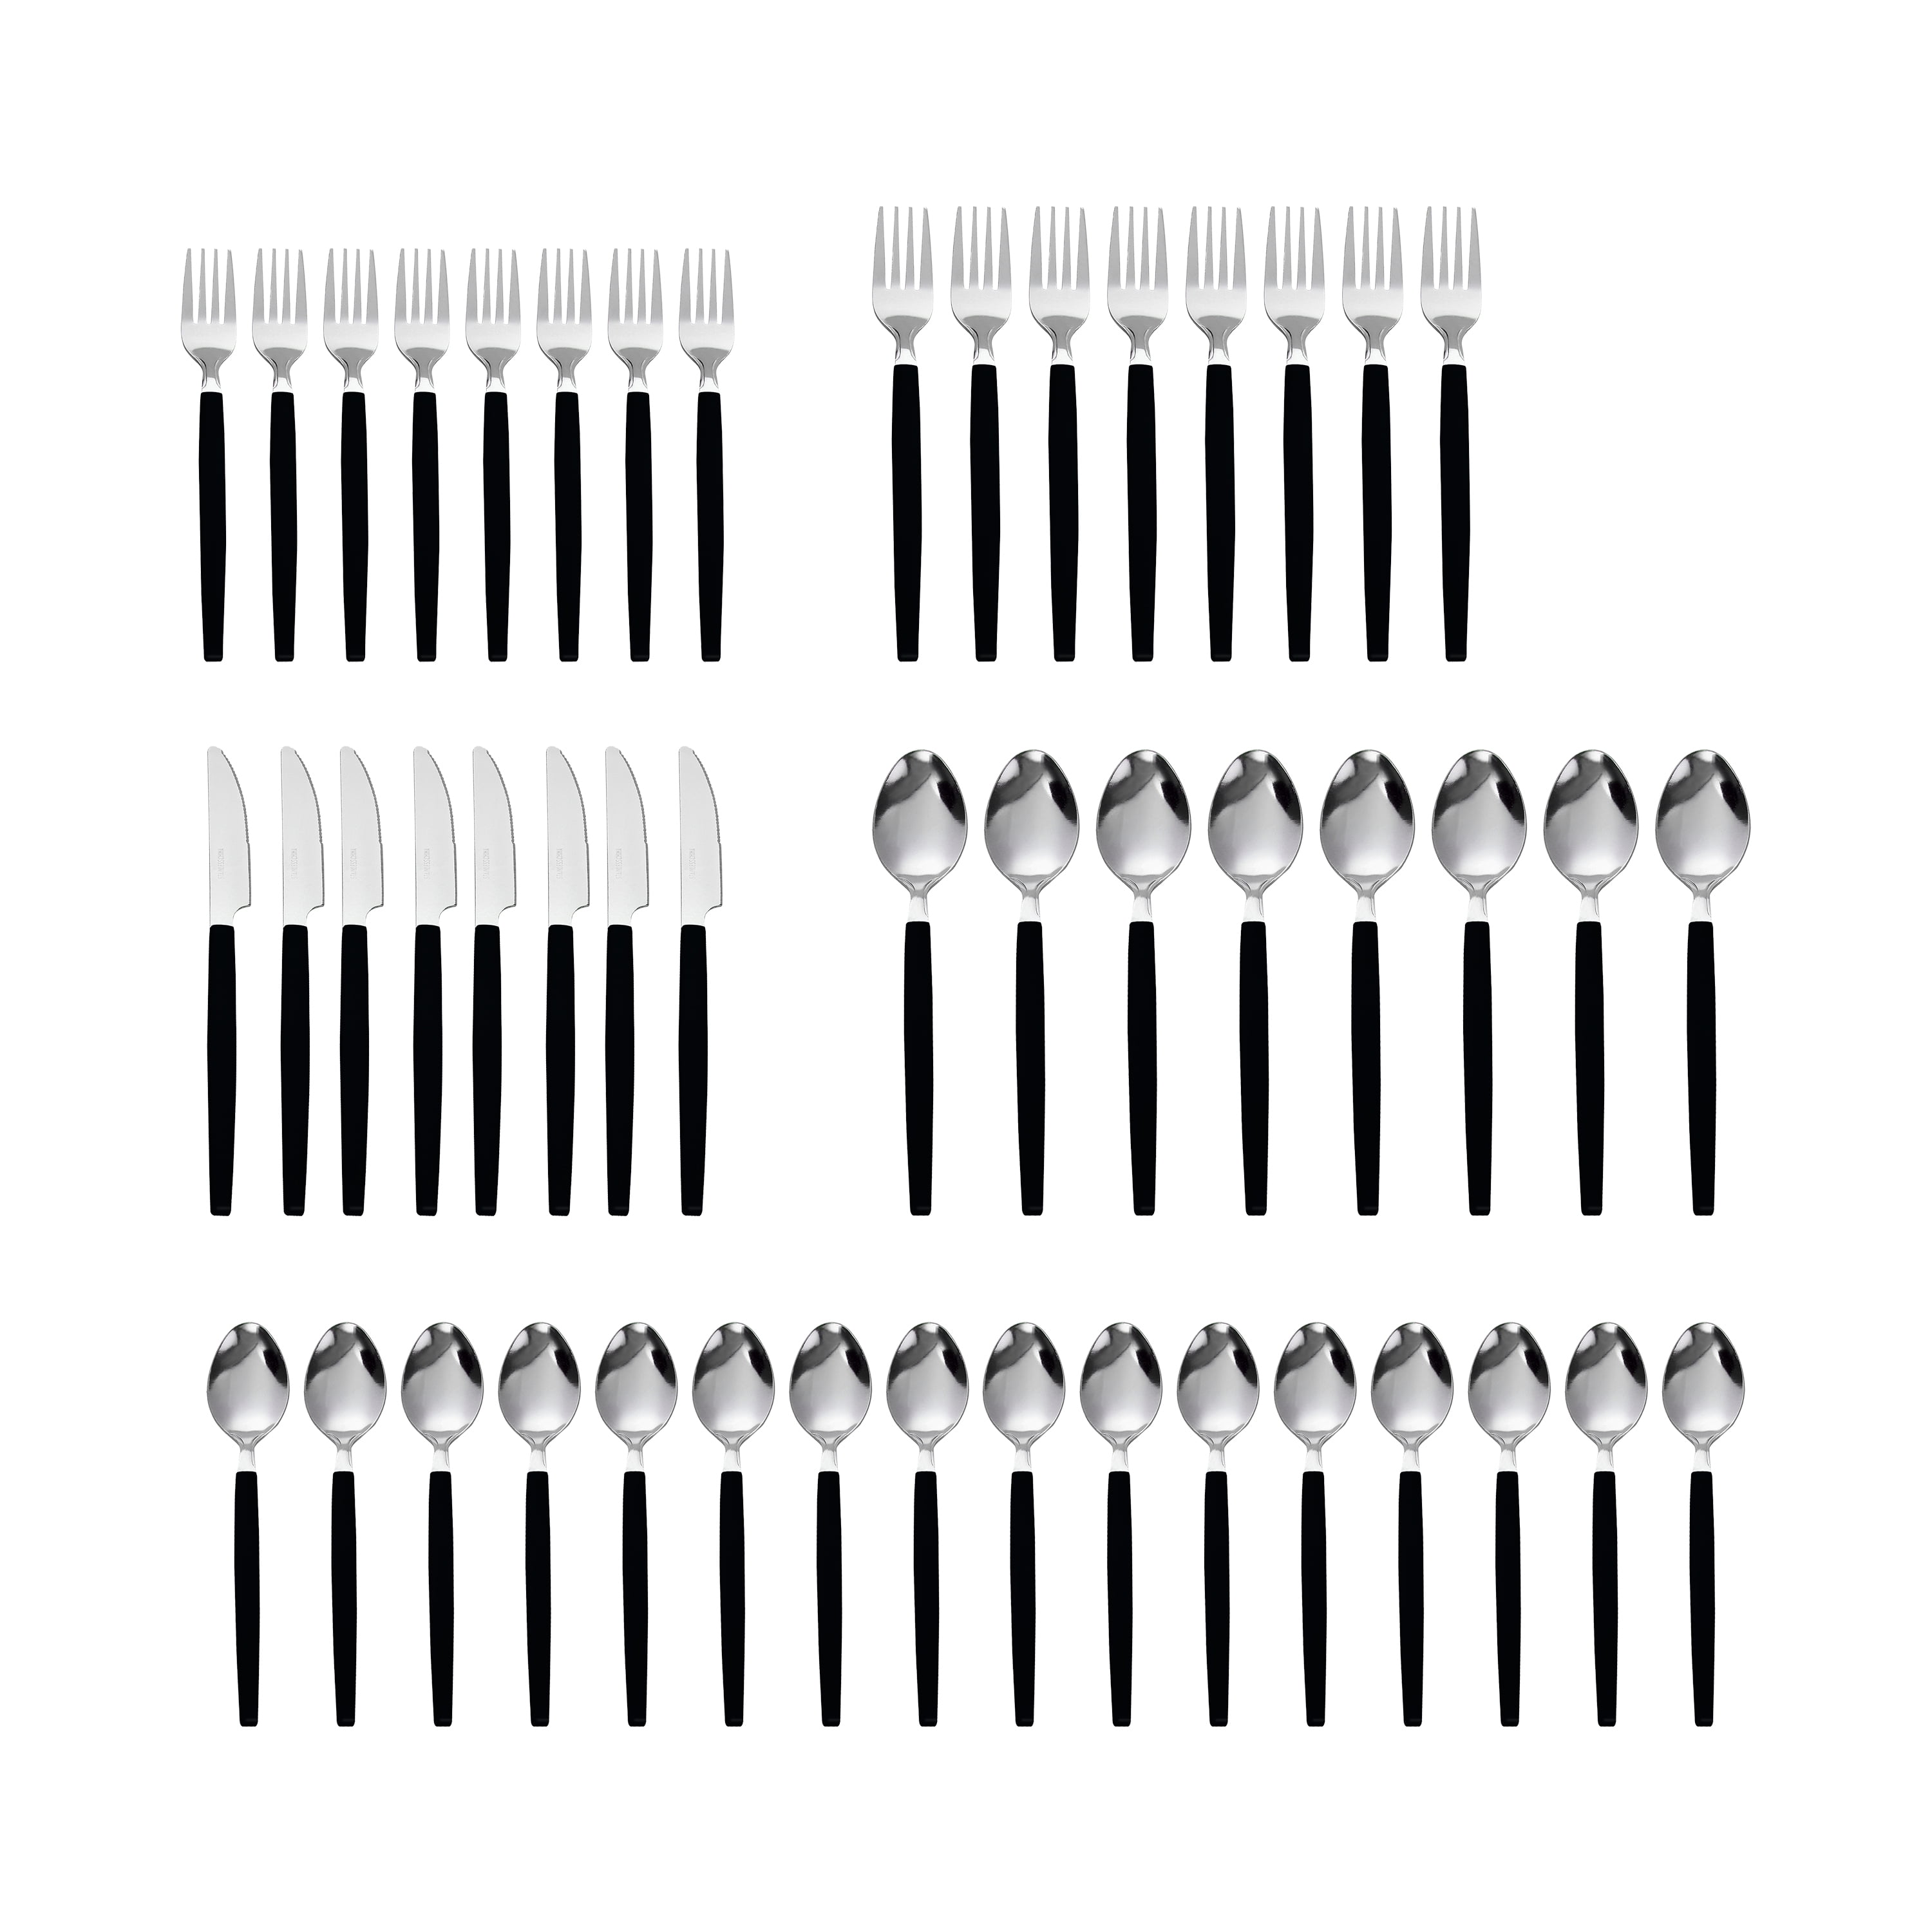 Mainstays 49 Piece Stainless Steel and Black Plastic Flatware Set with Organizer Tray, Service for 8